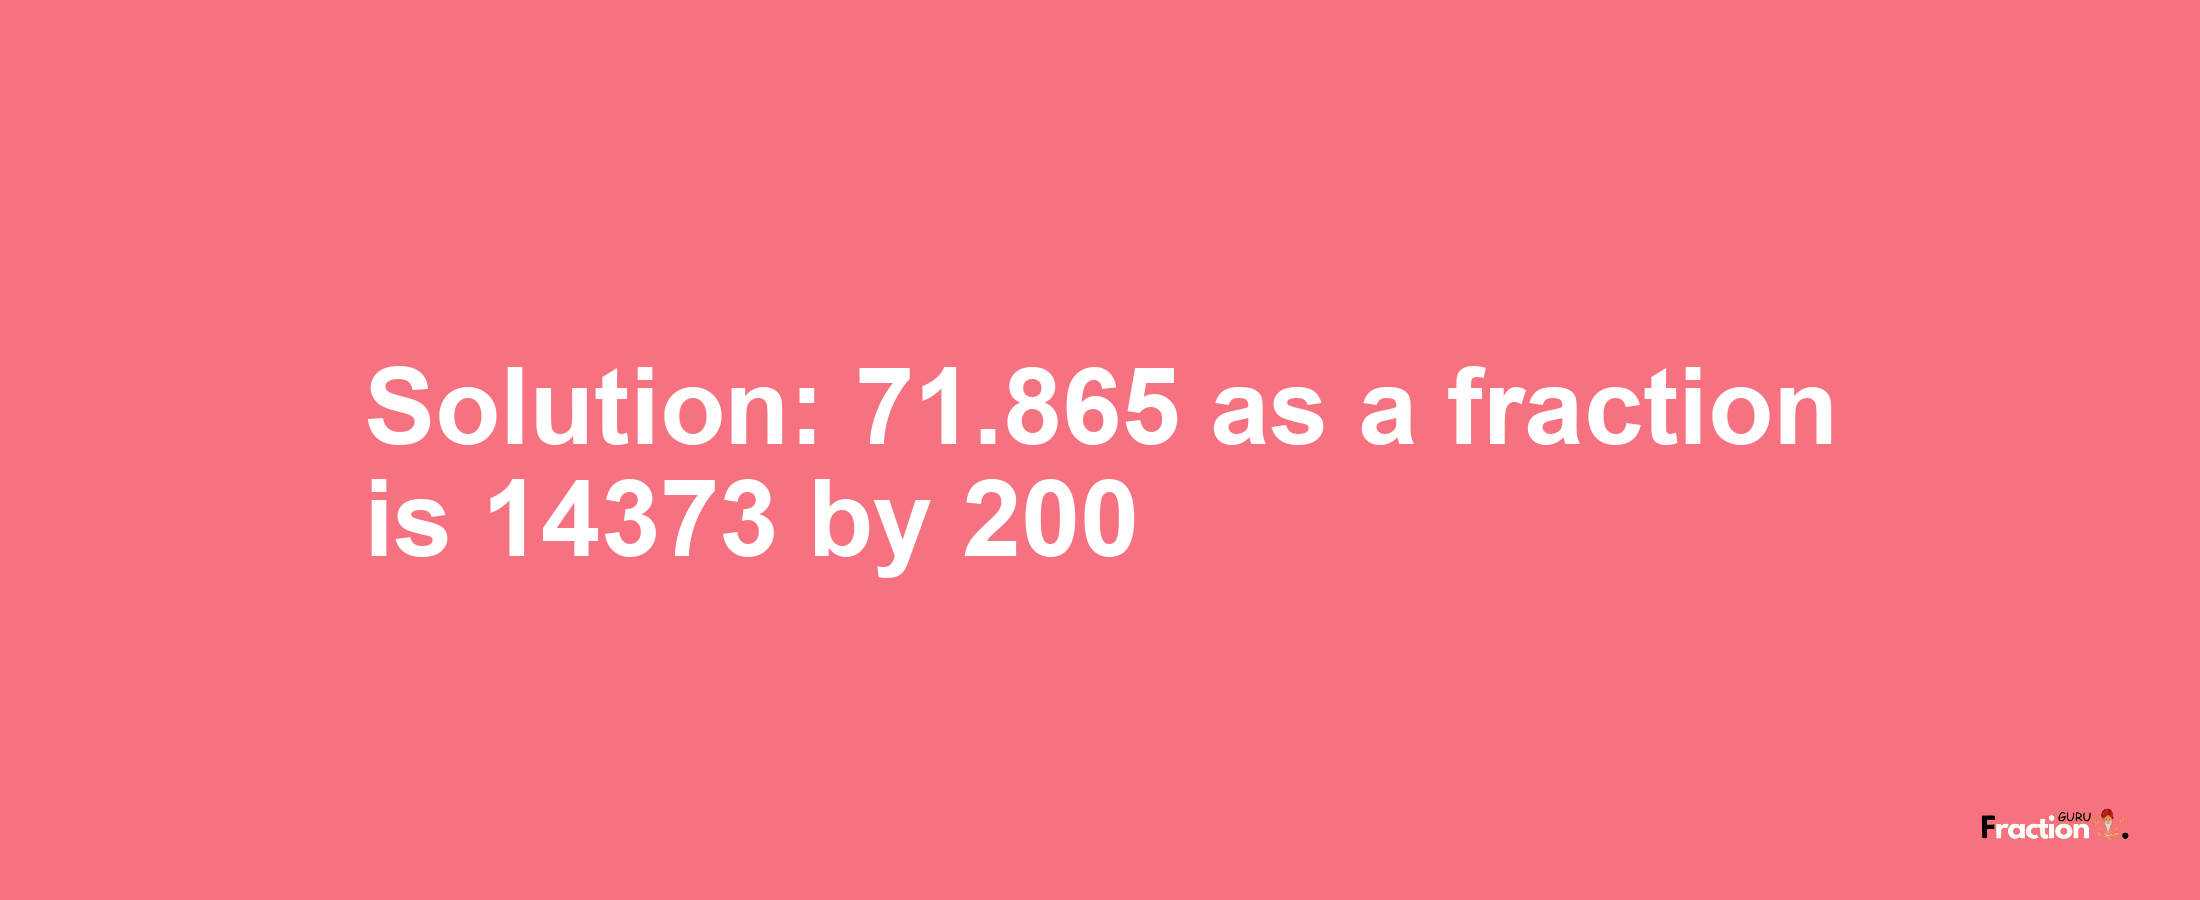 Solution:71.865 as a fraction is 14373/200